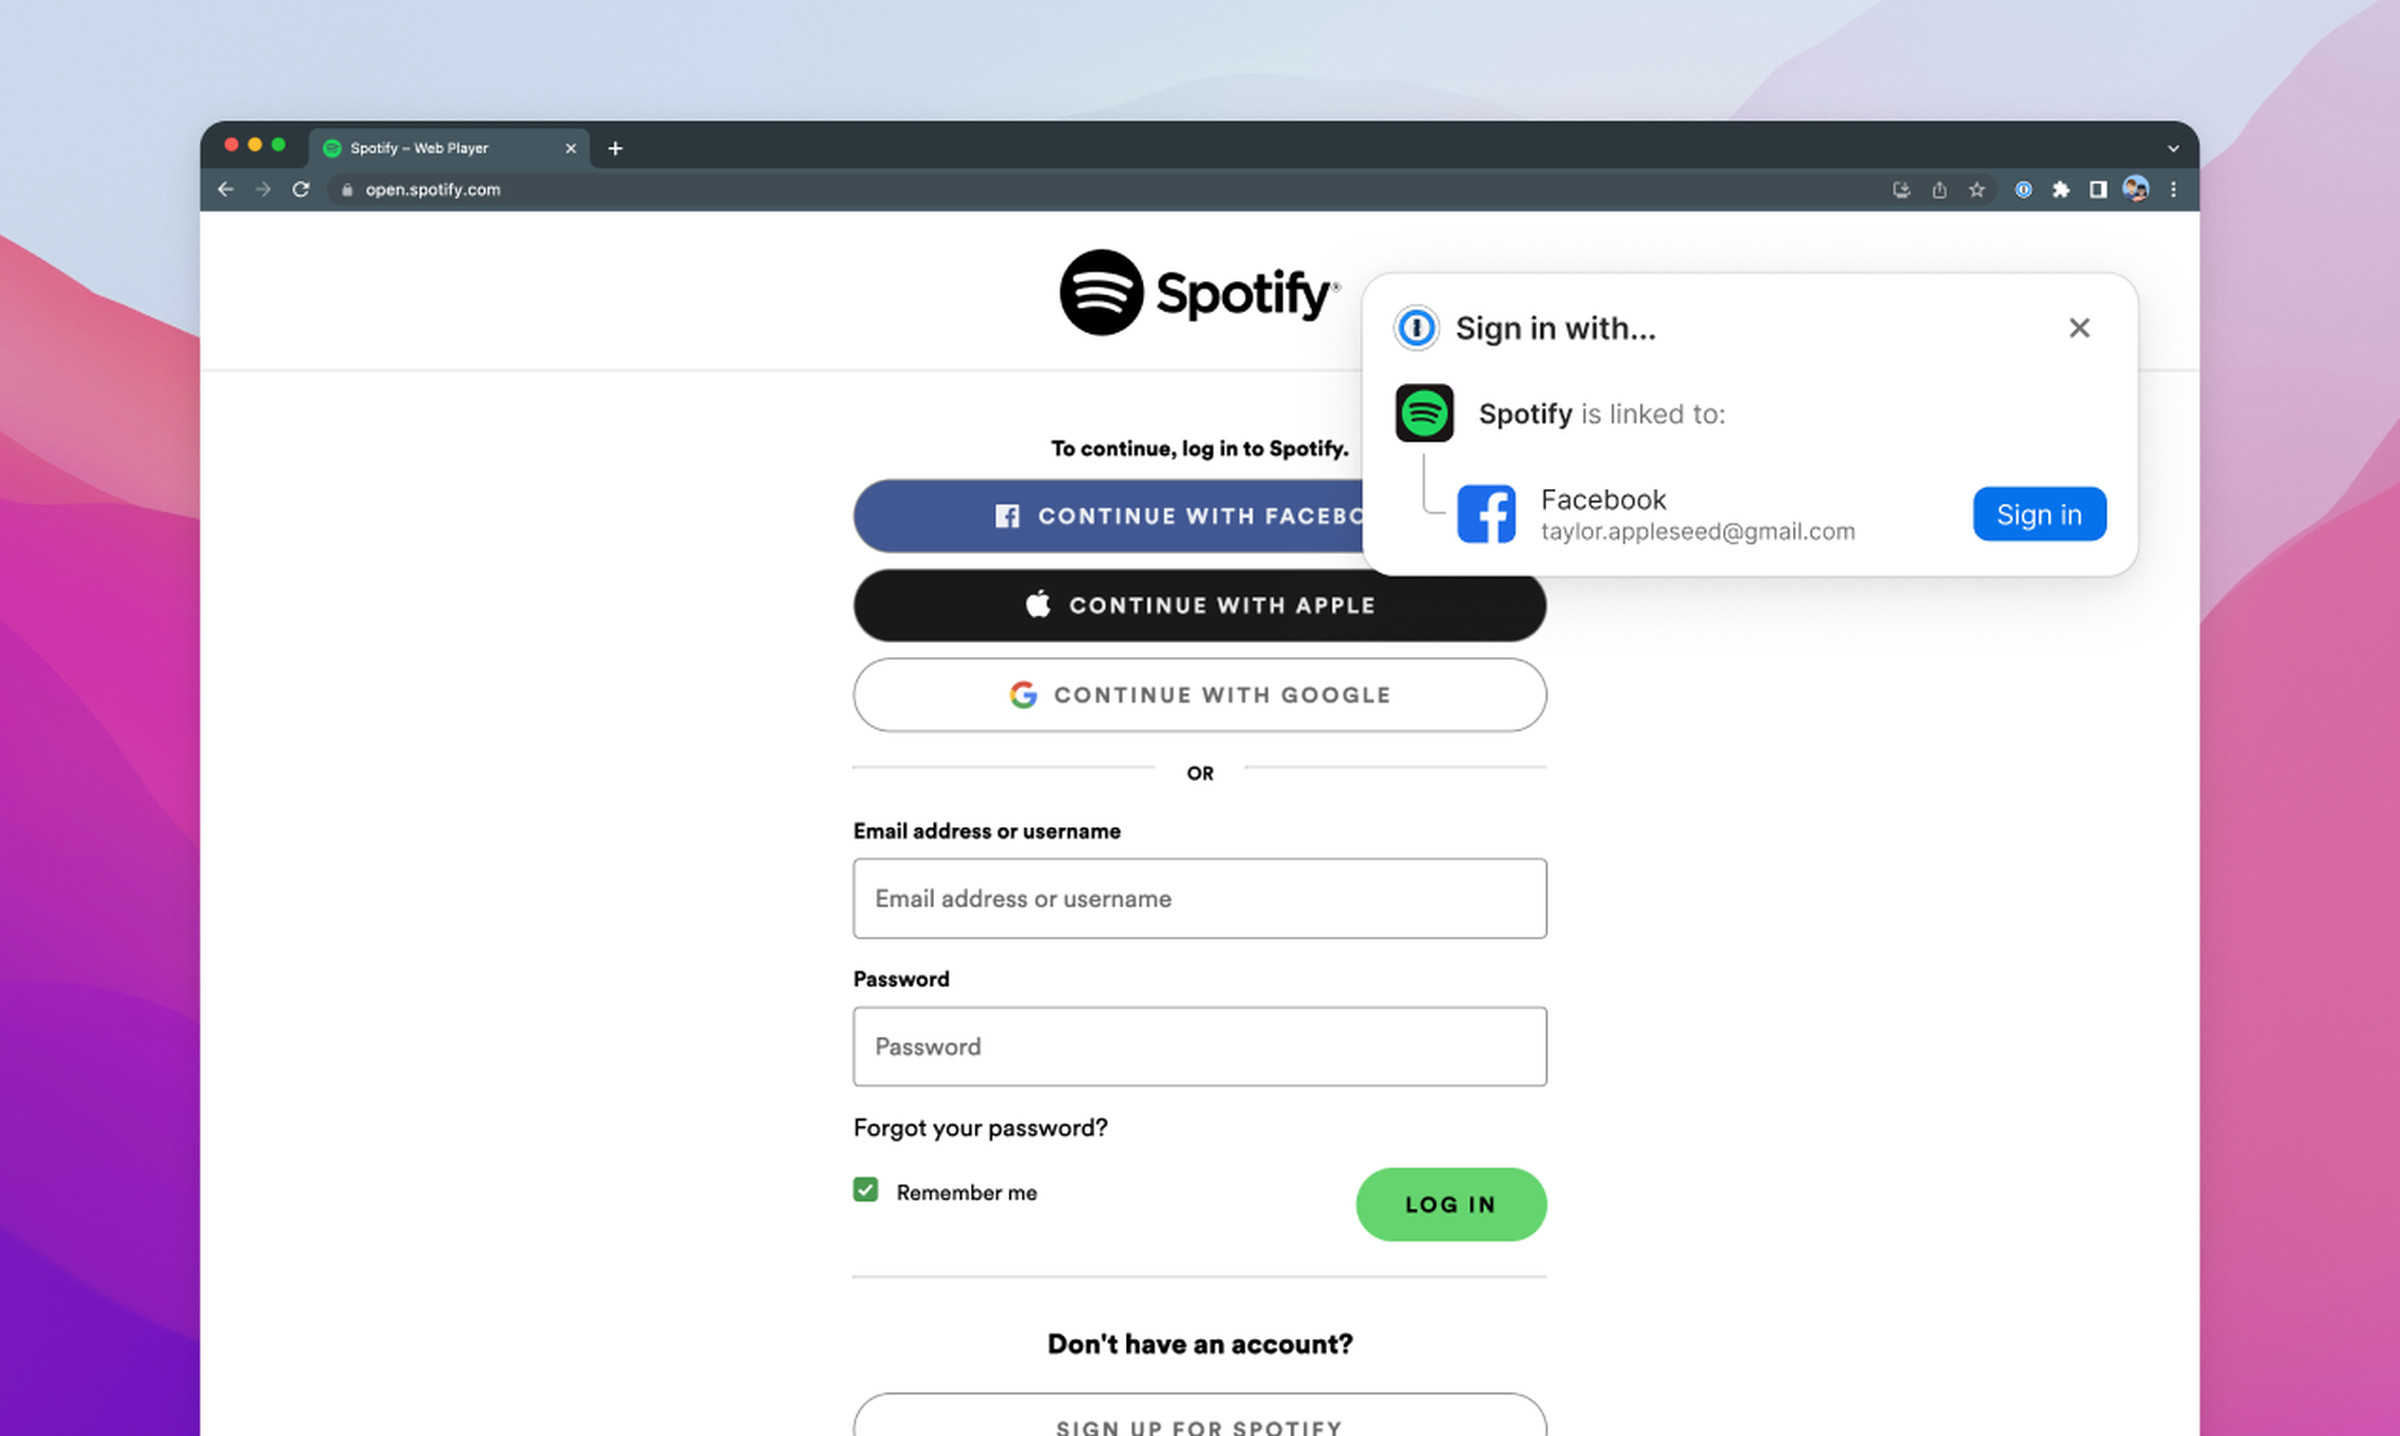 1Password now remembers which third-party provider your Spotify account is linked to.